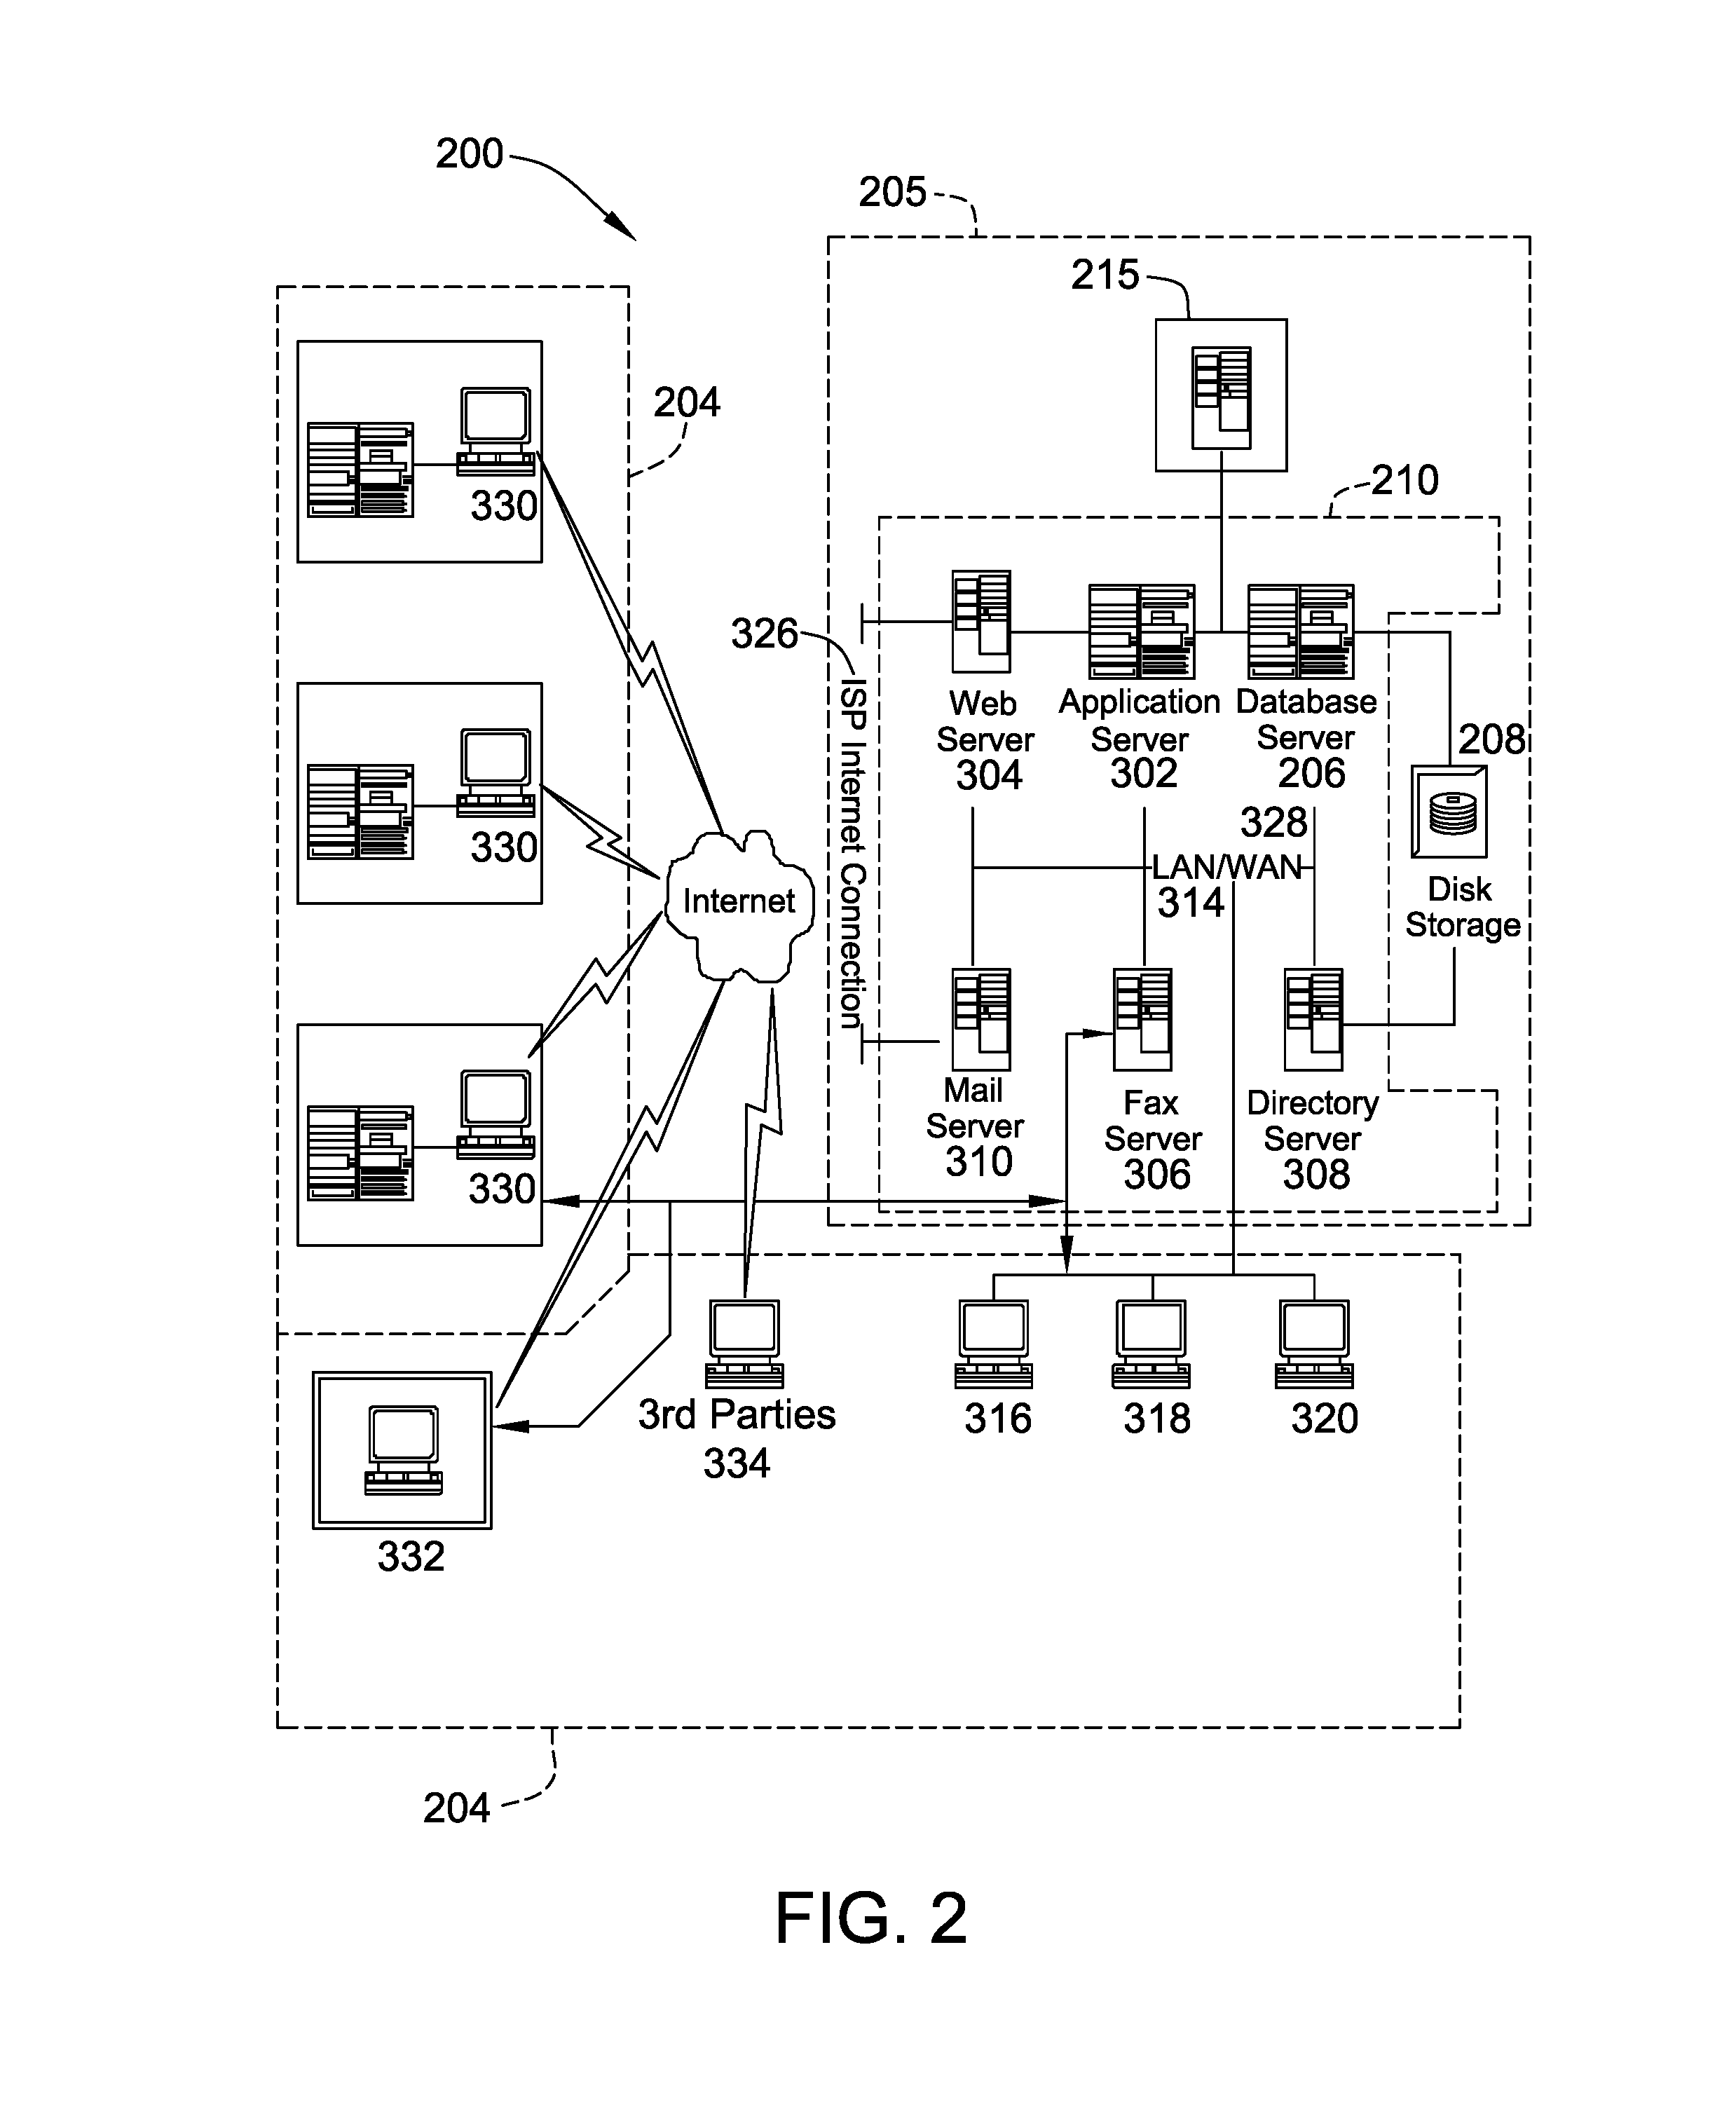 Systems and methods for generating longitudinal data profiles from multiple data sources